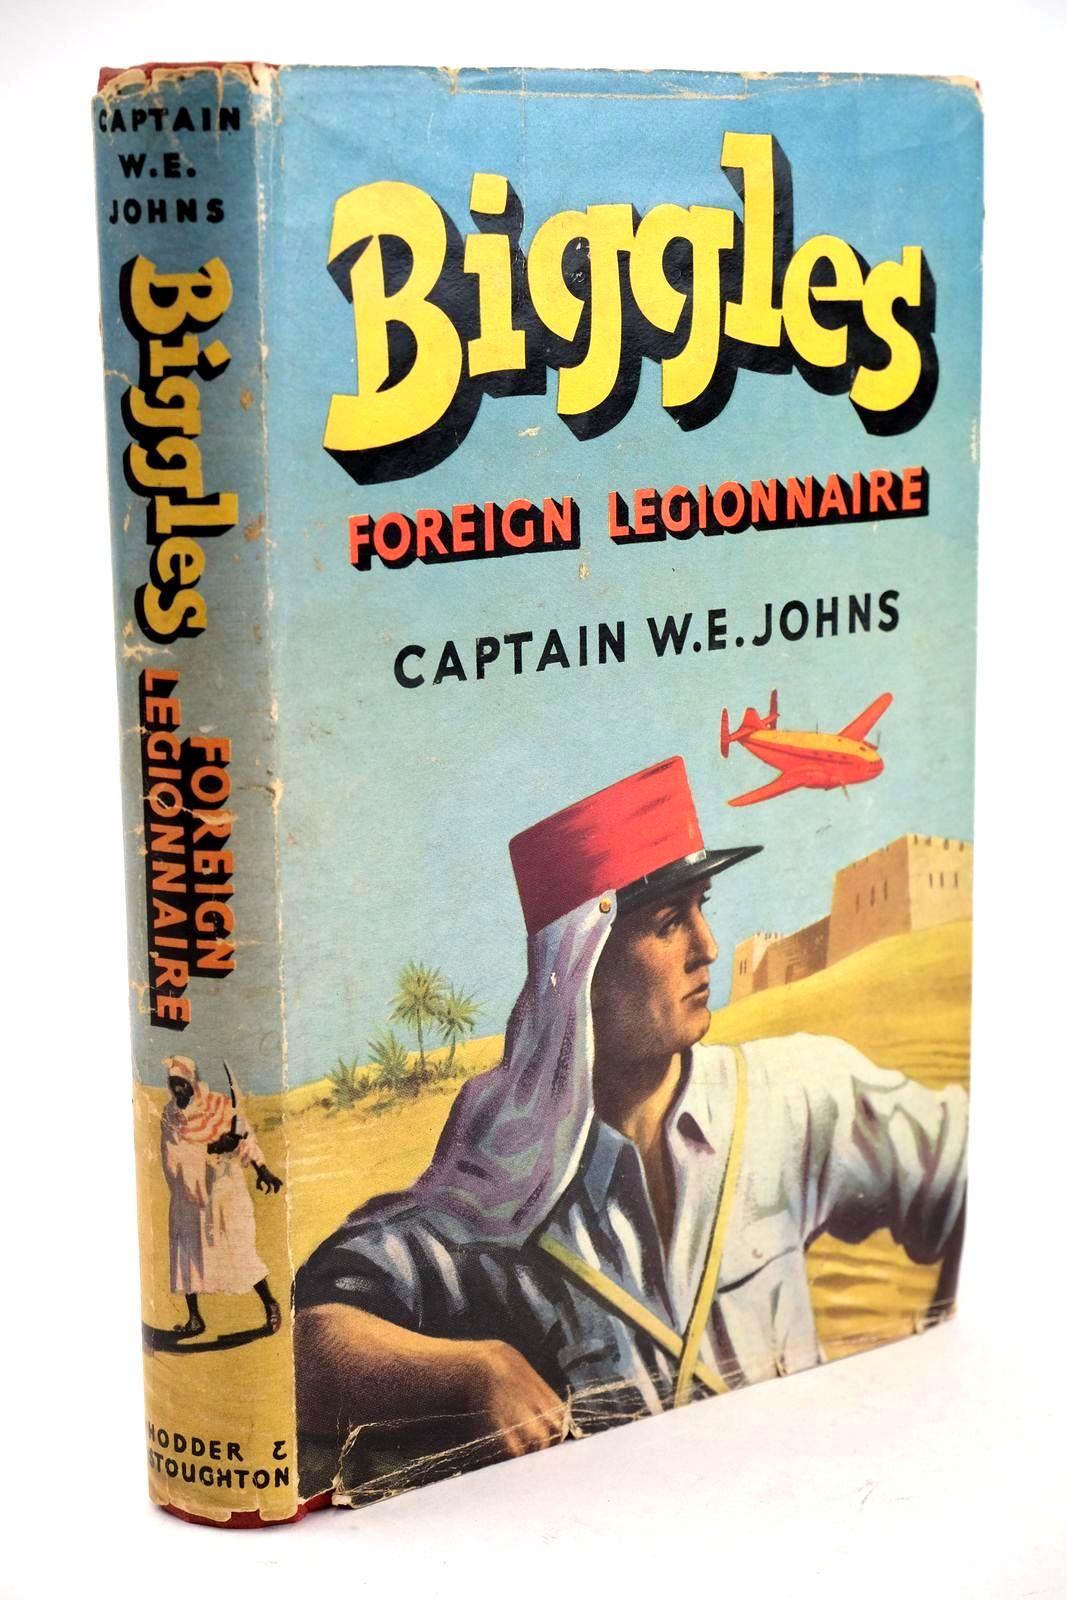 Photo of BIGGLES FOREIGN LEGIONNAIRE written by Johns, W.E. illustrated by Stead,  published by Hodder & Stoughton (STOCK CODE: 1324164)  for sale by Stella & Rose's Books